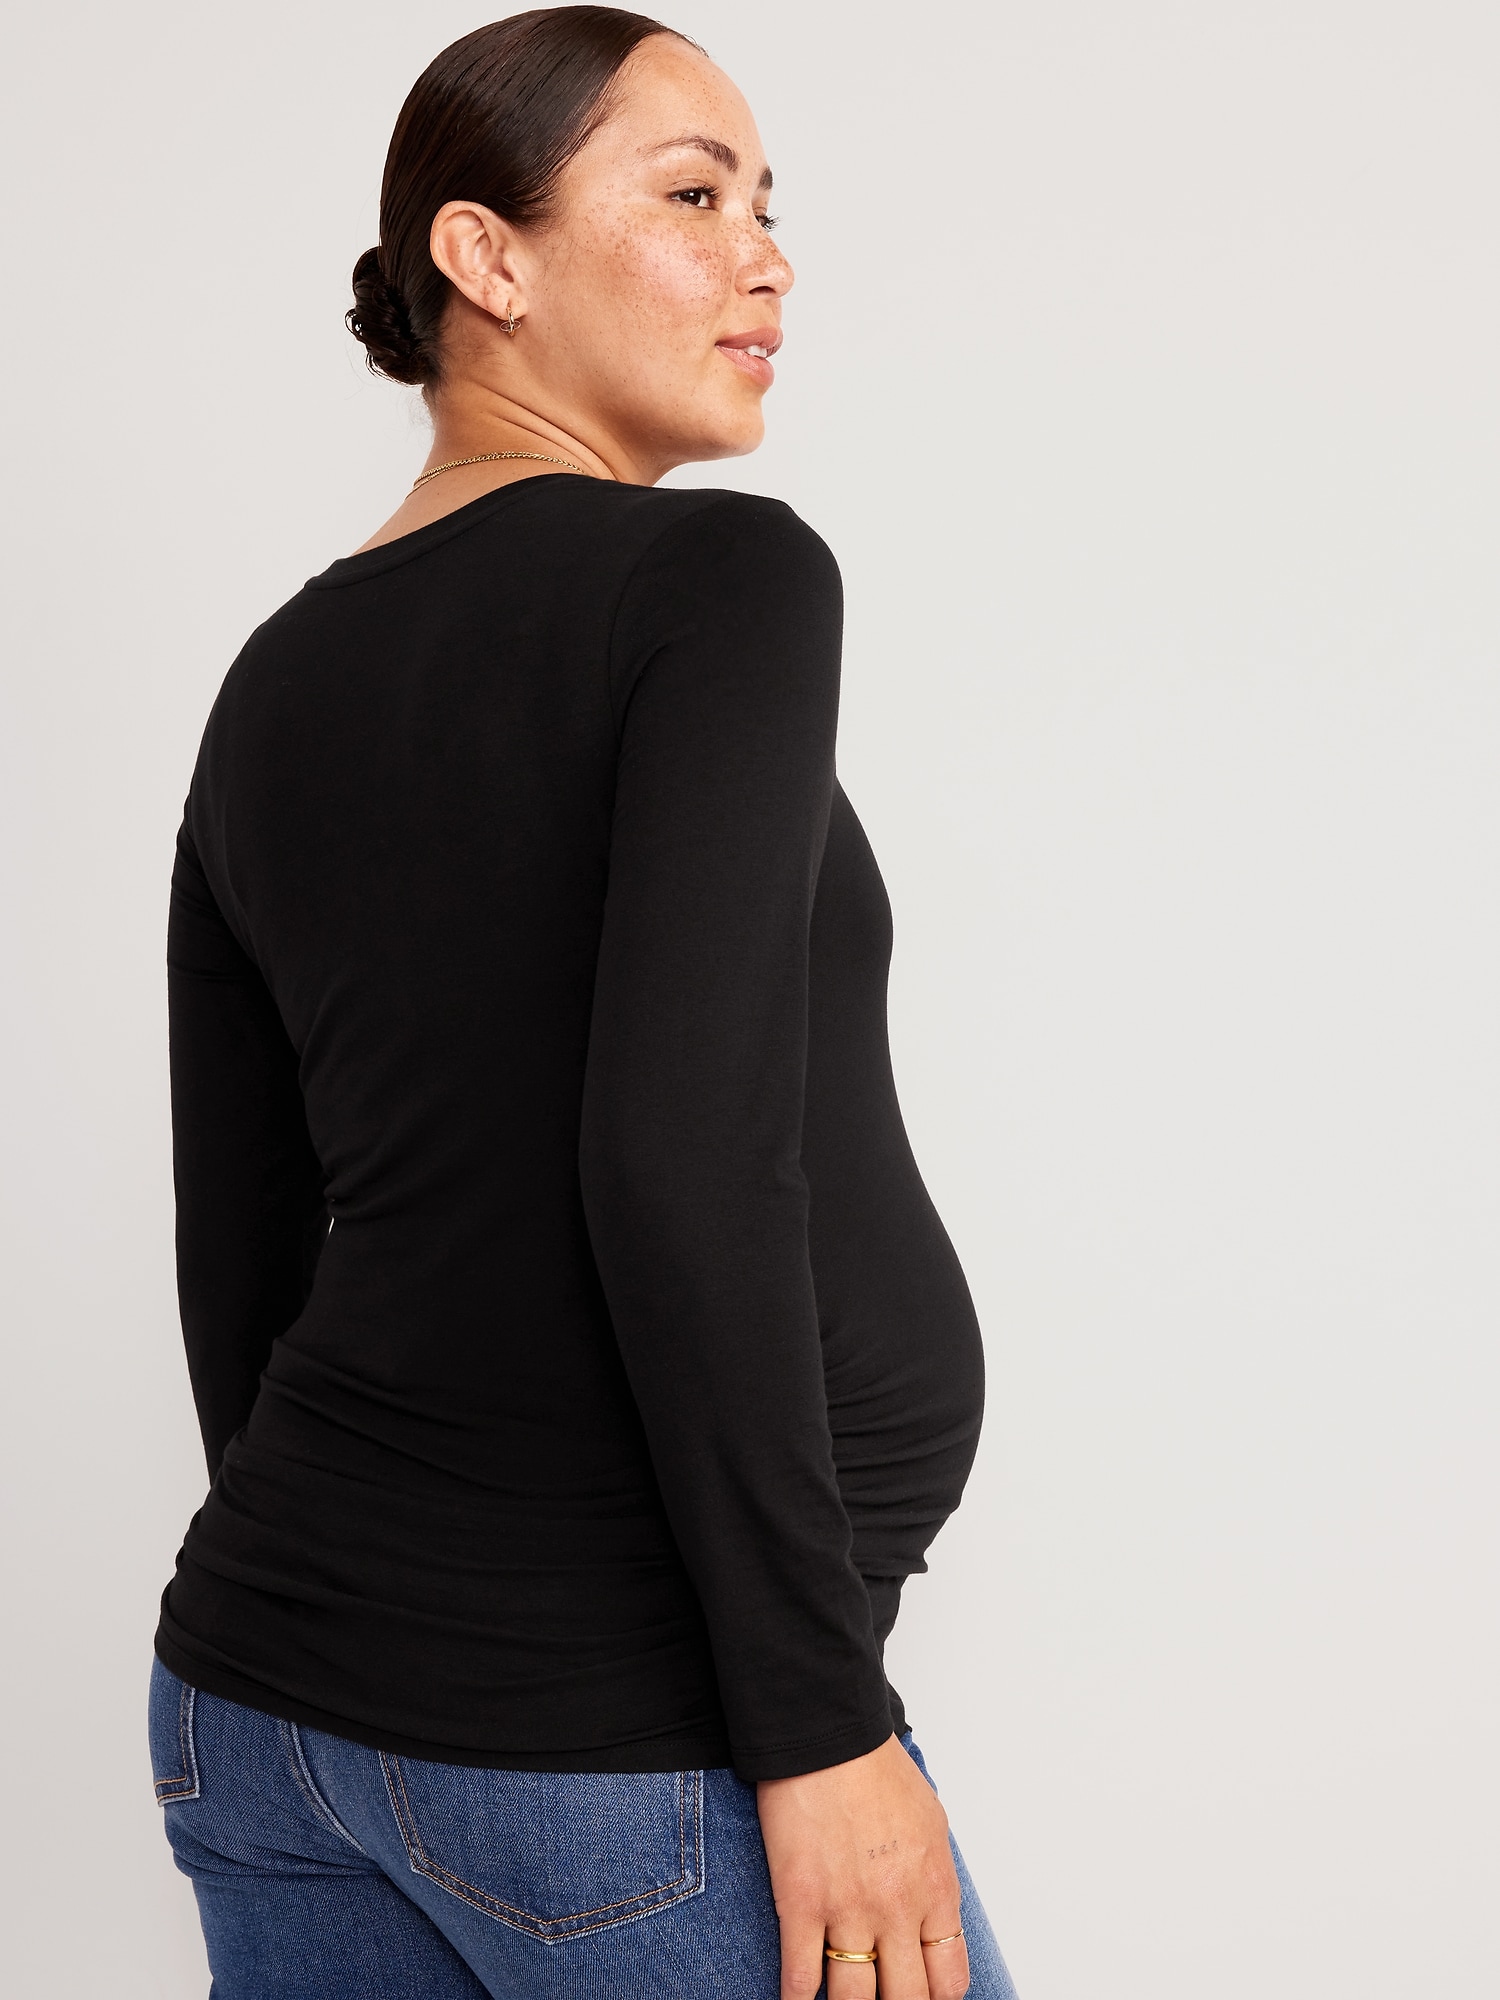 Maternity EveryWear Fitted Long-Sleeve T-Shirt | Old Navy